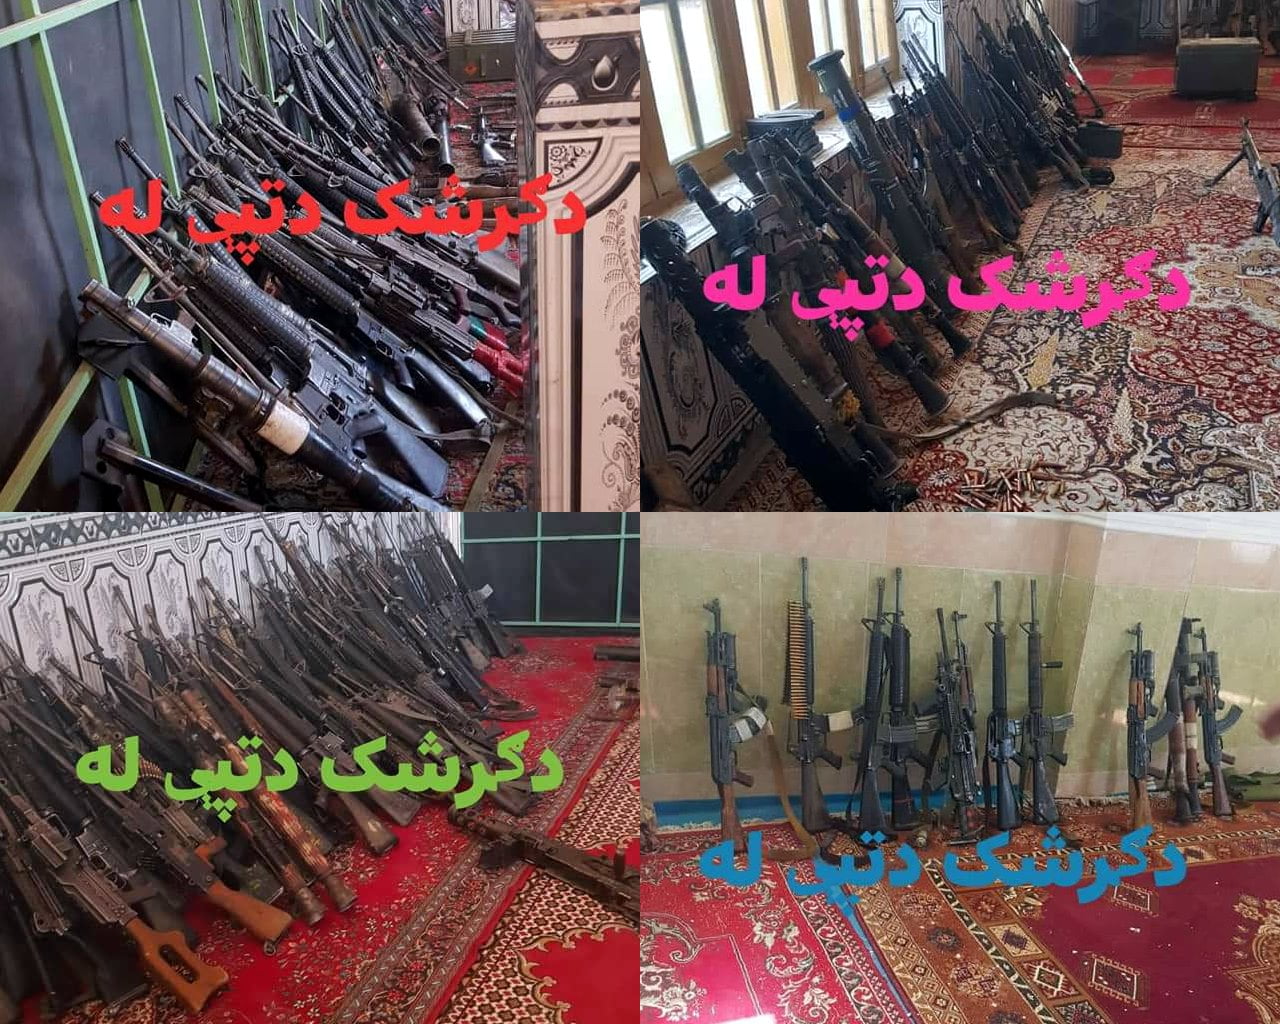 Weapons captured by Taliban in Gereshk, Helmand